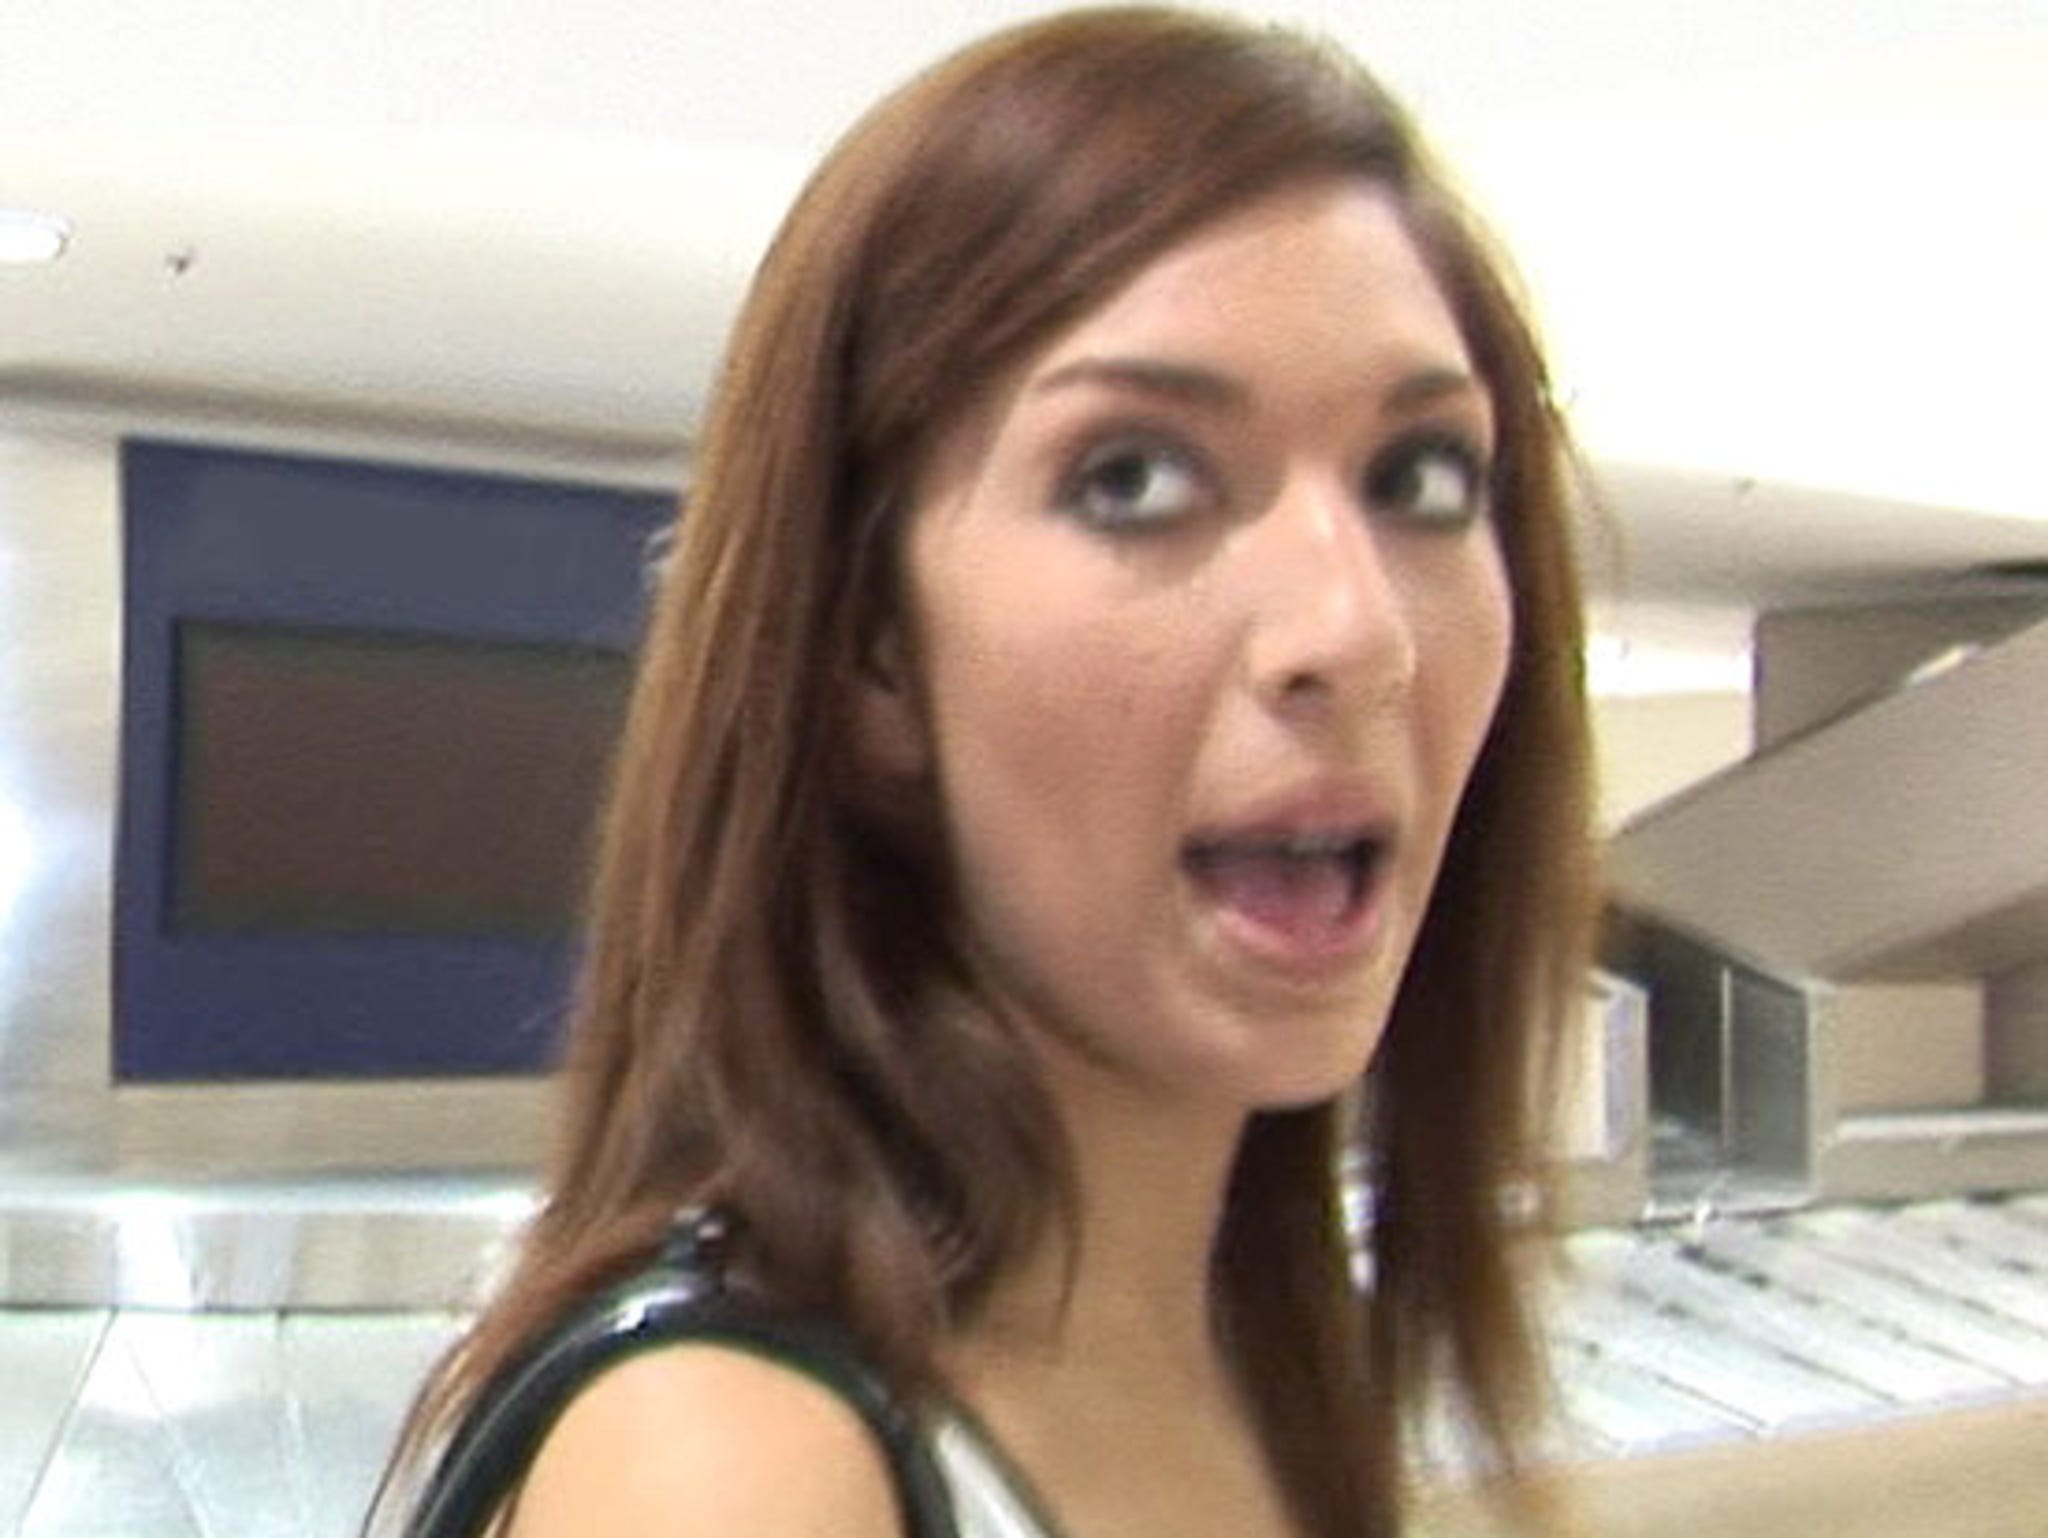 Pron Xxxxxx Hd Video Girl - Farrah Abraham -- Yes, I Made a Porno ... But I Want Millions to Release It